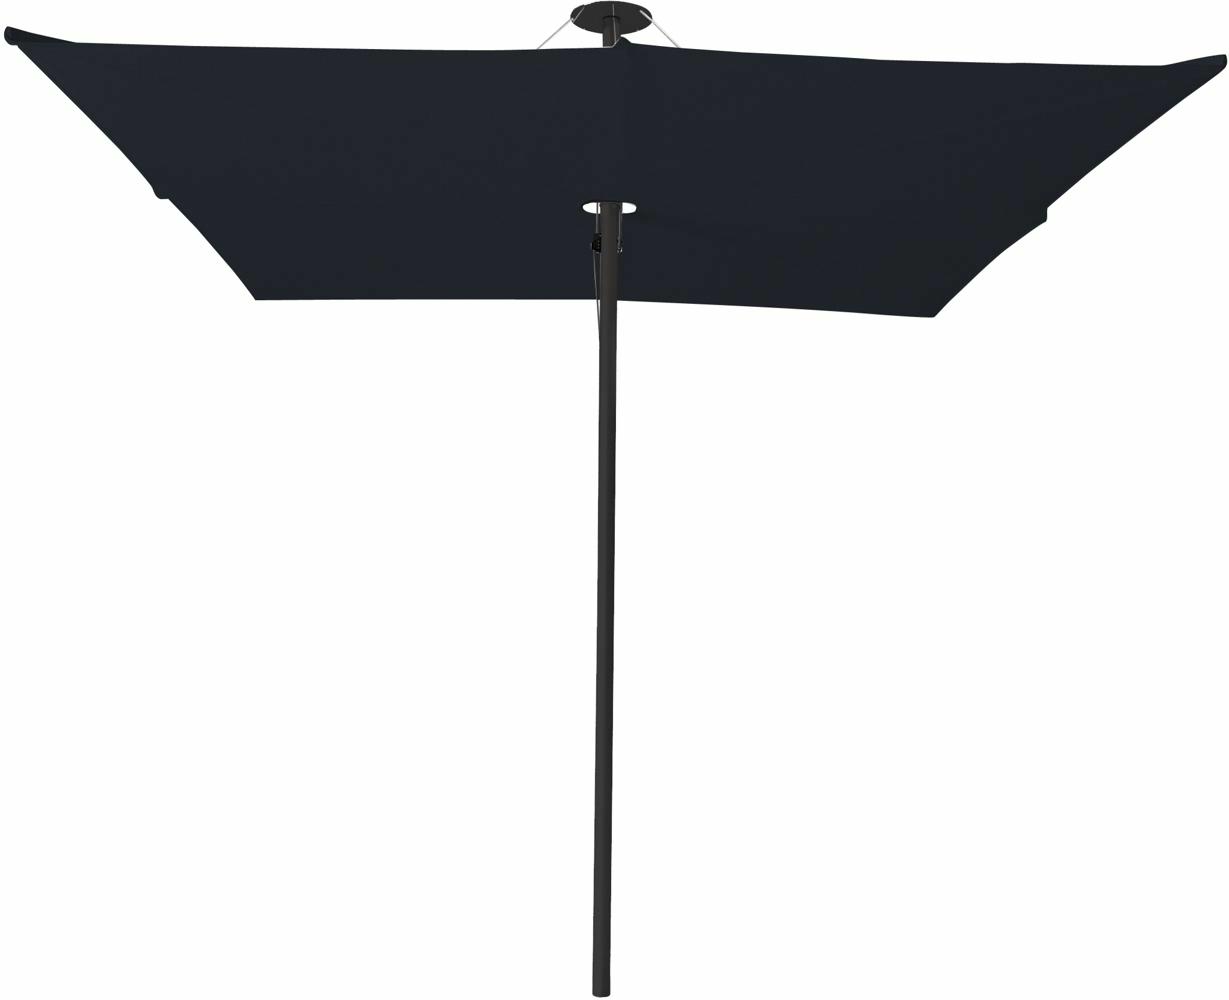 Infina center post umbrella, 3 m square, with frame in Black and Colorum Black canopy.